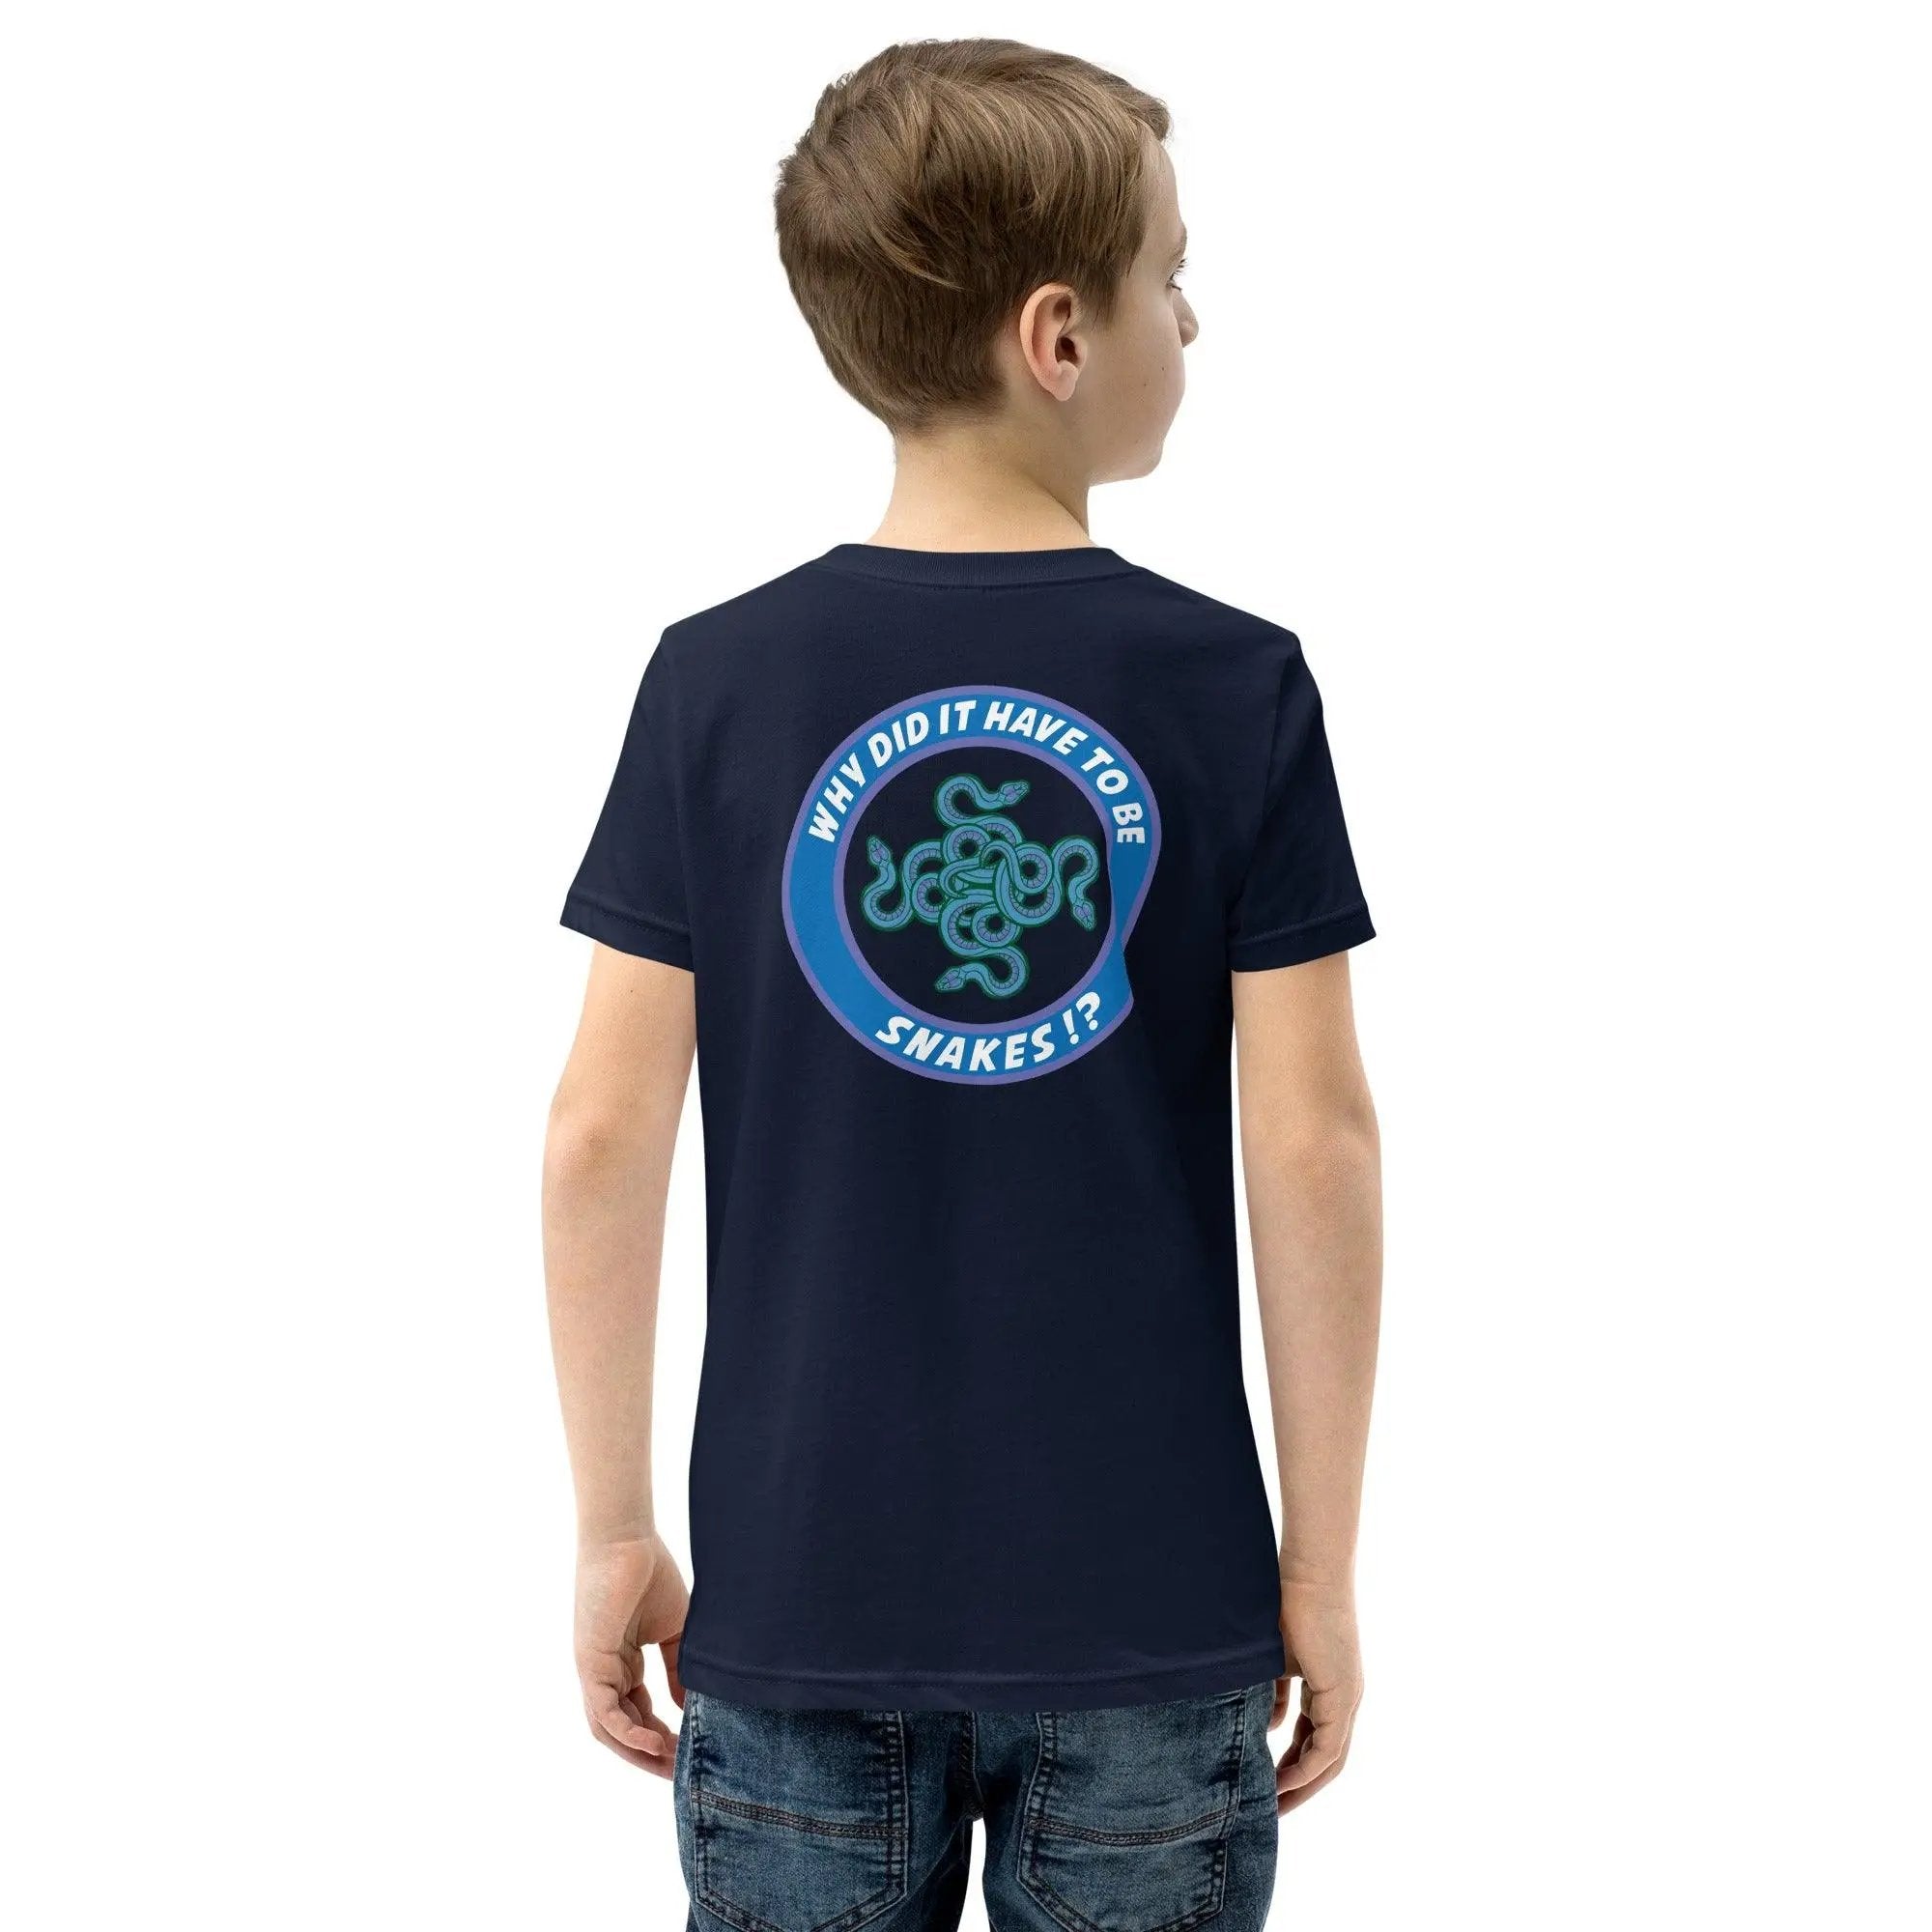 Why Did It Have To Be Snakes? Youth Short Sleeve T-Shirt VAWDesigns